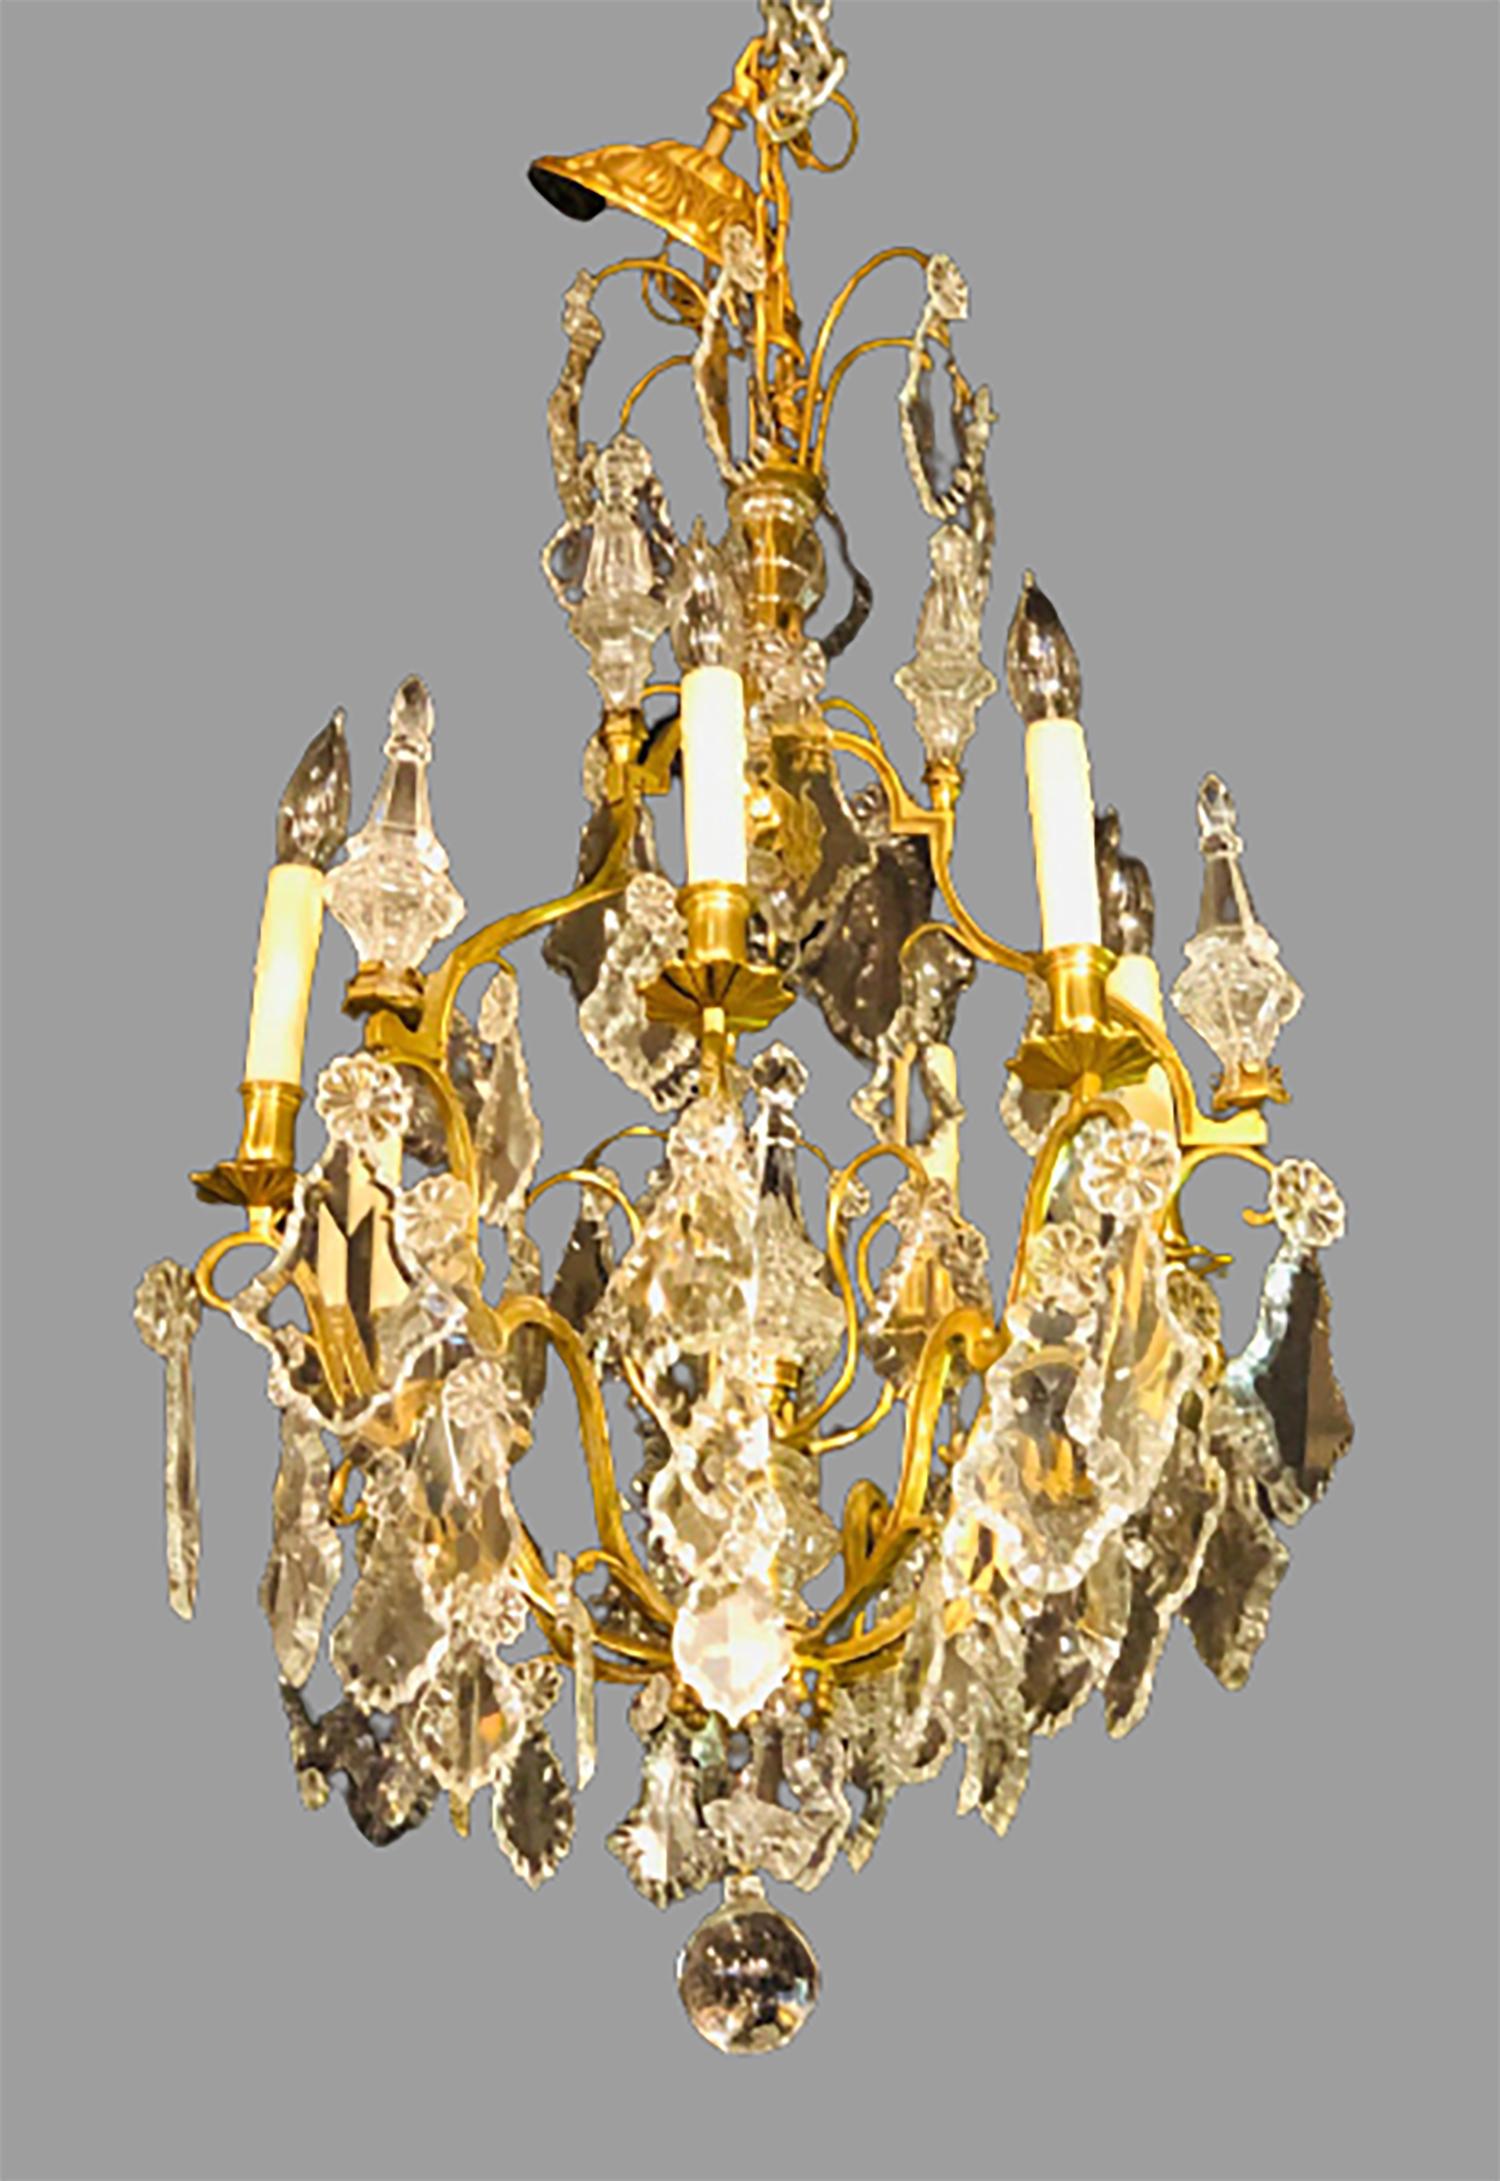 French bronze and crystal gilt chandelier. Louis XVI style six-light chandelier having a glass column-form center with brass arms supporting hanging large crystals flowing from the central form. Recently rewires this finely crafted chandelier is